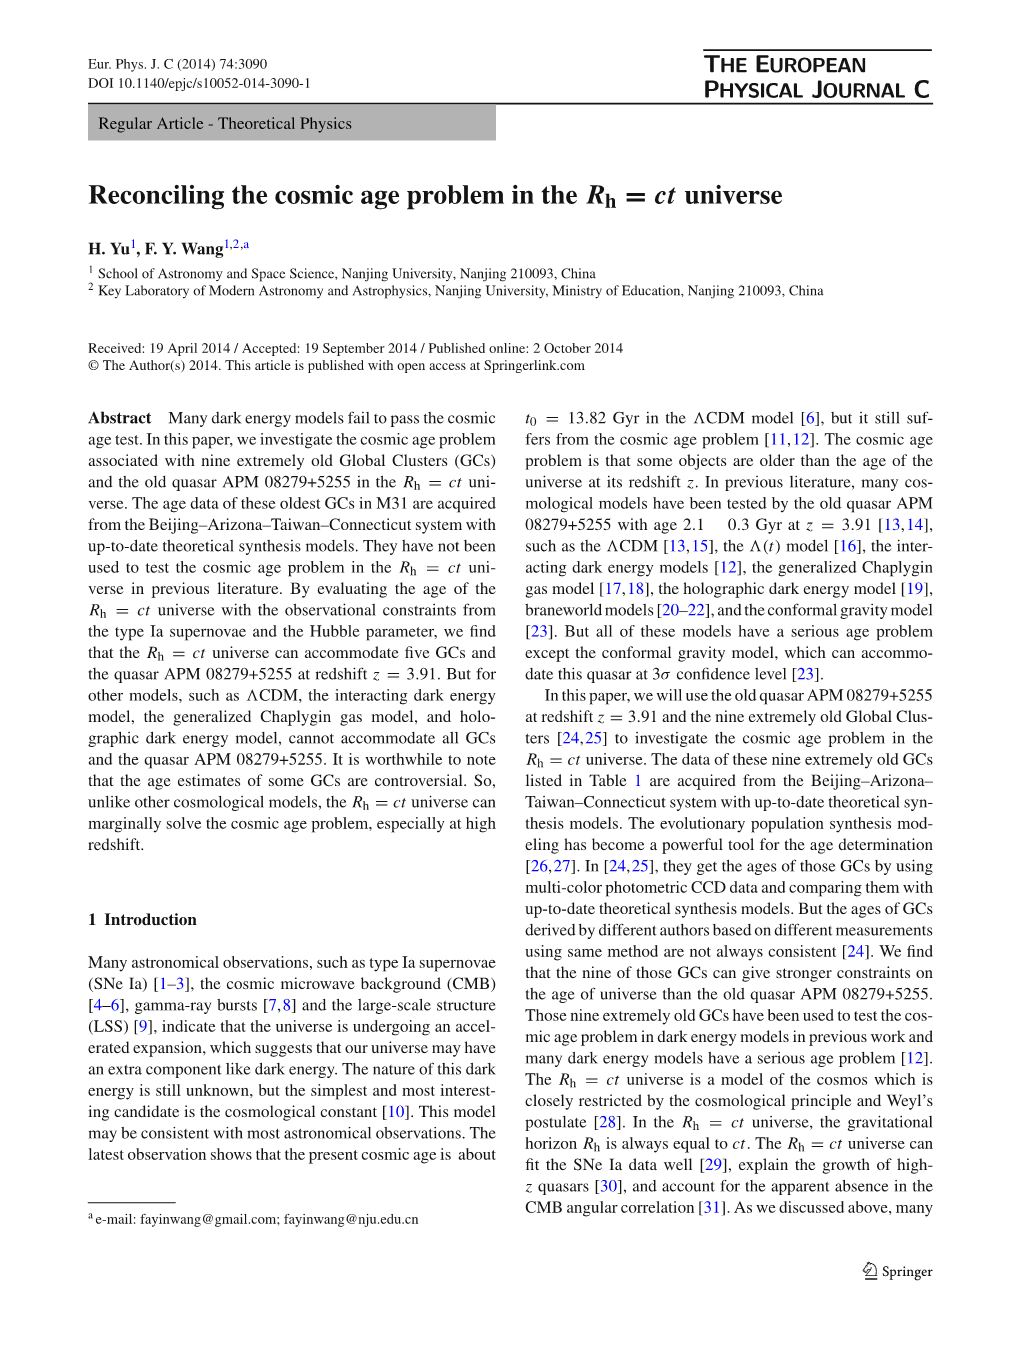 Reconciling the Cosmic Age Problem in the Rh = Ct Universe